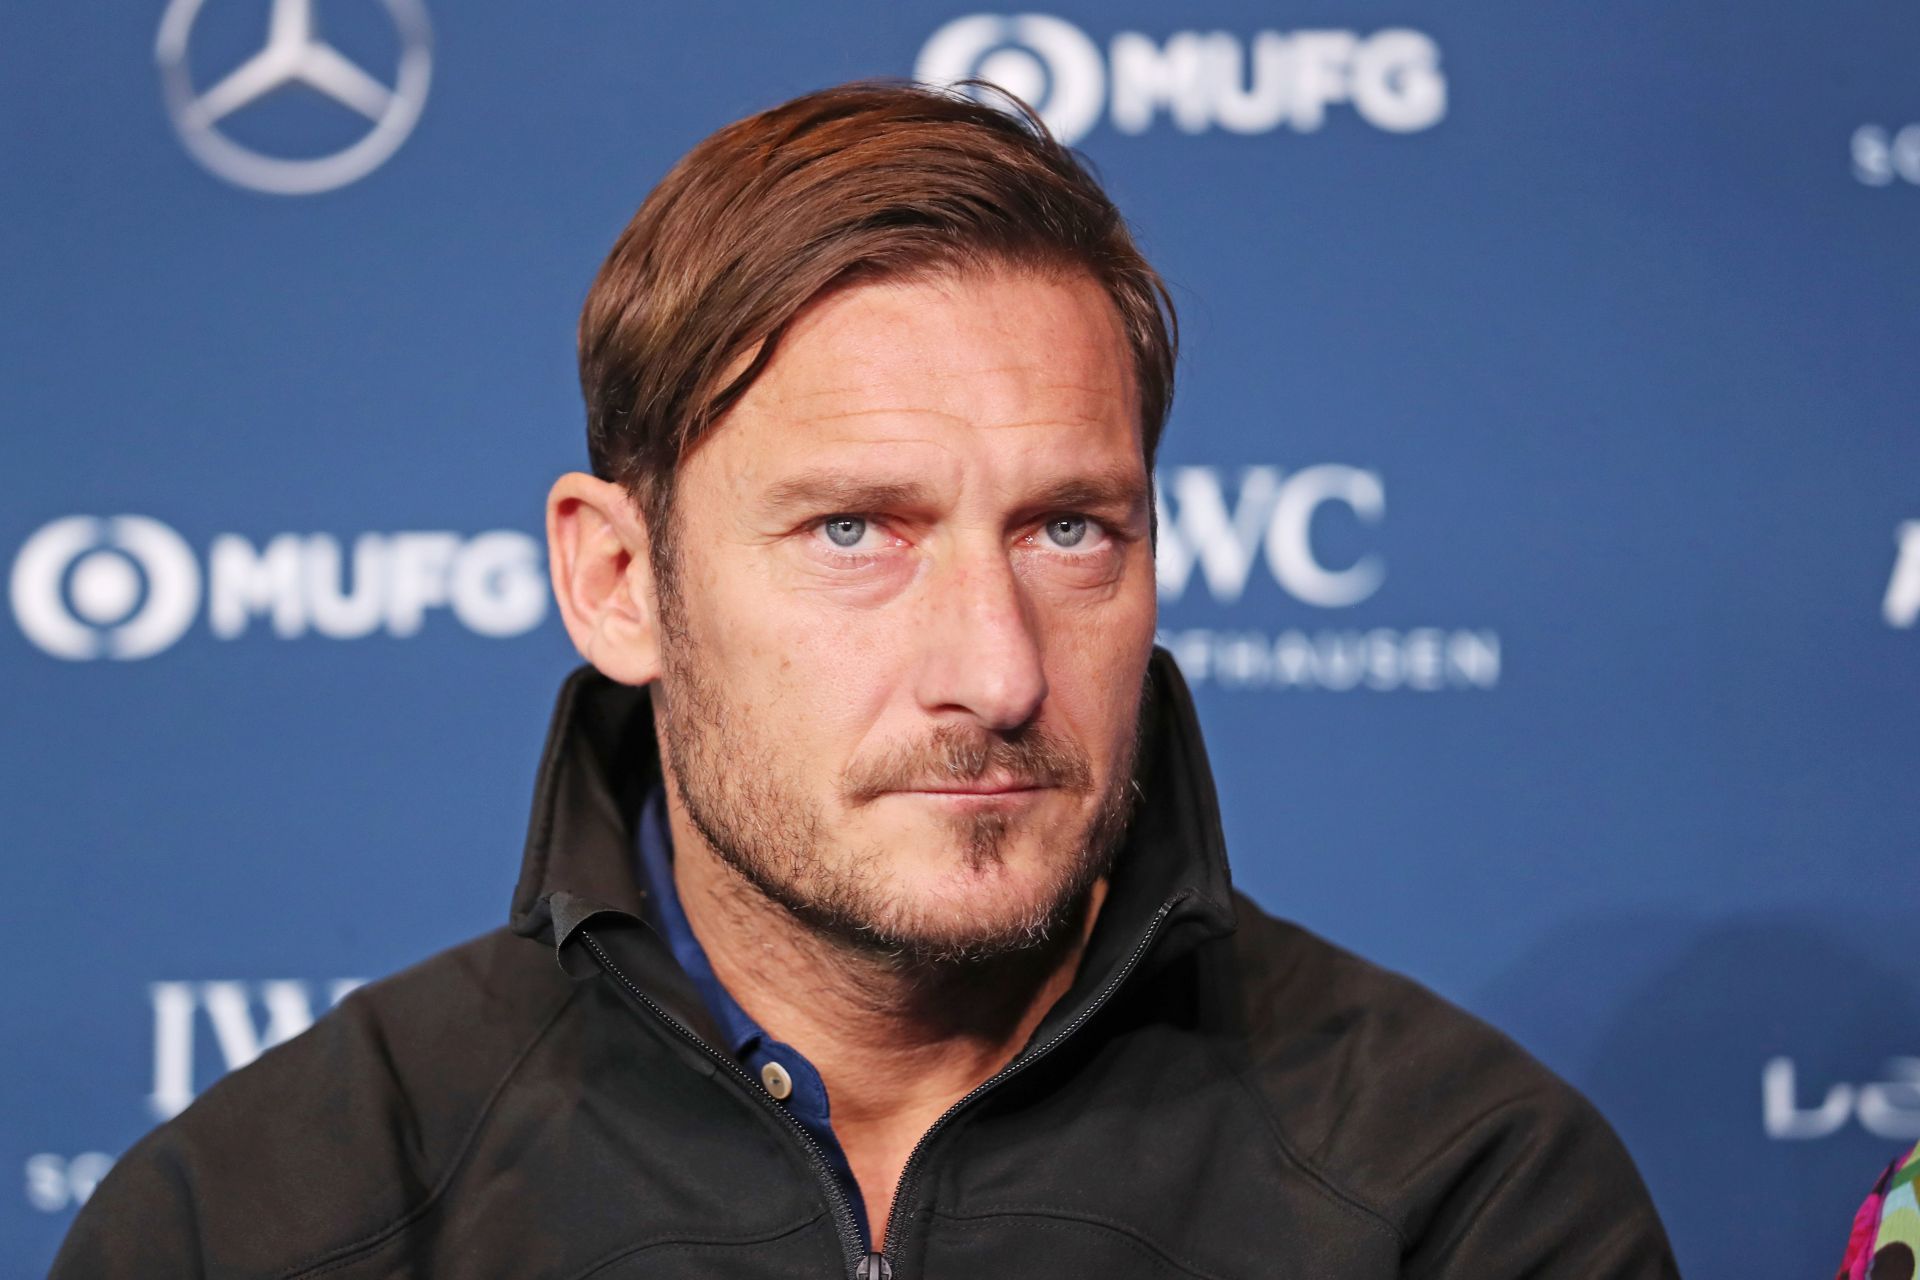 Francesco Totti has said that Real Madrid were desperate to sign him.